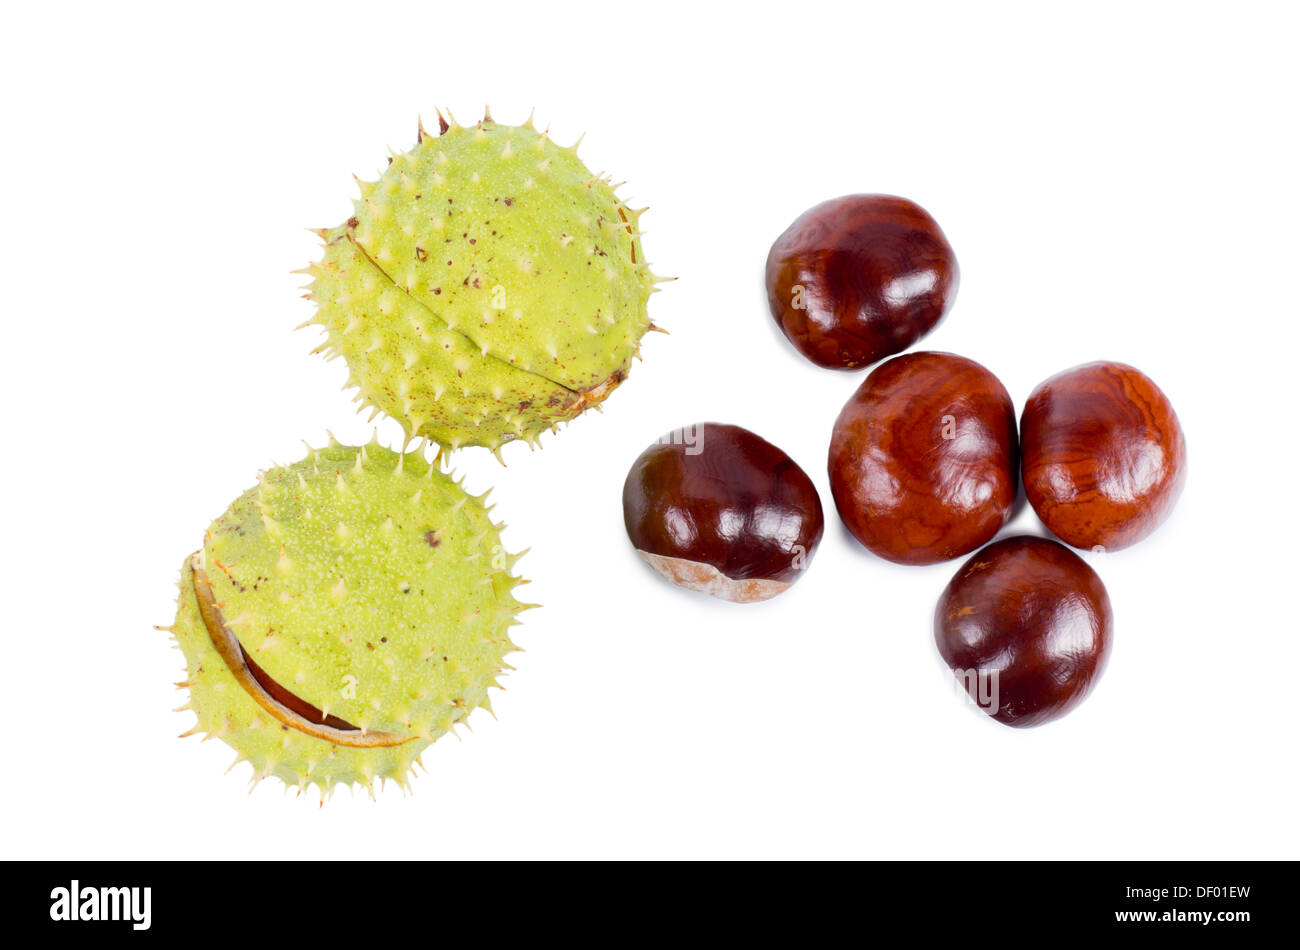 Fresh sweet chestnuts from the Castanea tree complete with their spiny protective green husk and also with the husk removed to show the brown shell, isolated on white. Stock Photo